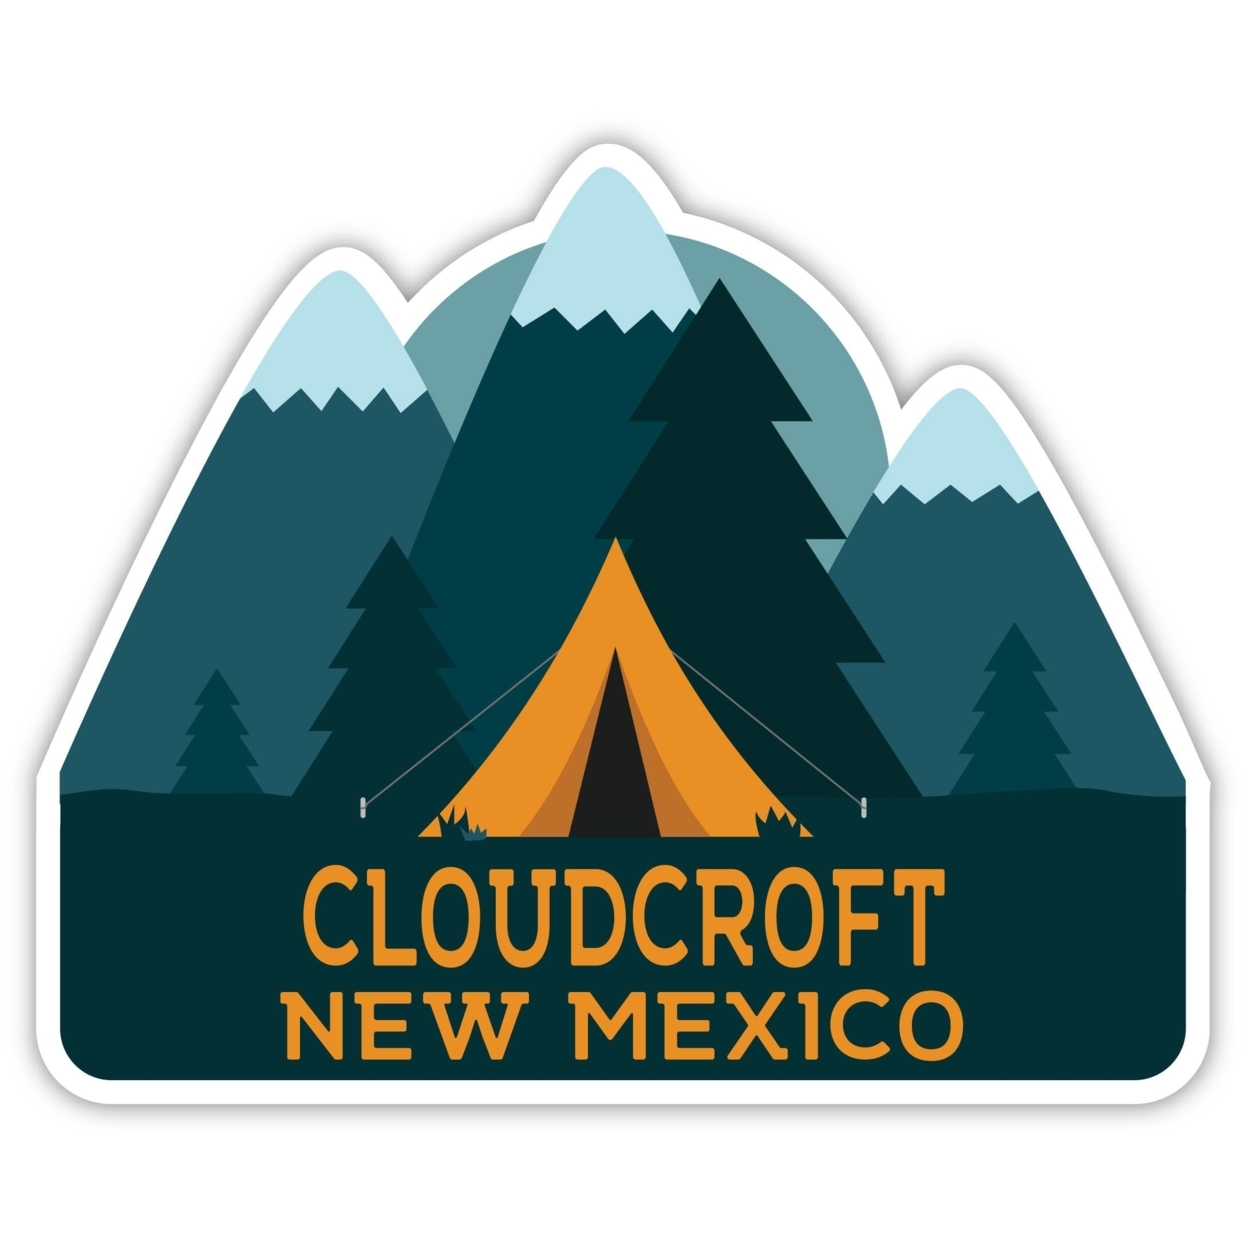 Cloudcroft New Mexico Souvenir Decorative Stickers (Choose Theme And Size) - 4-Pack, 2-Inch, Great Outdoors